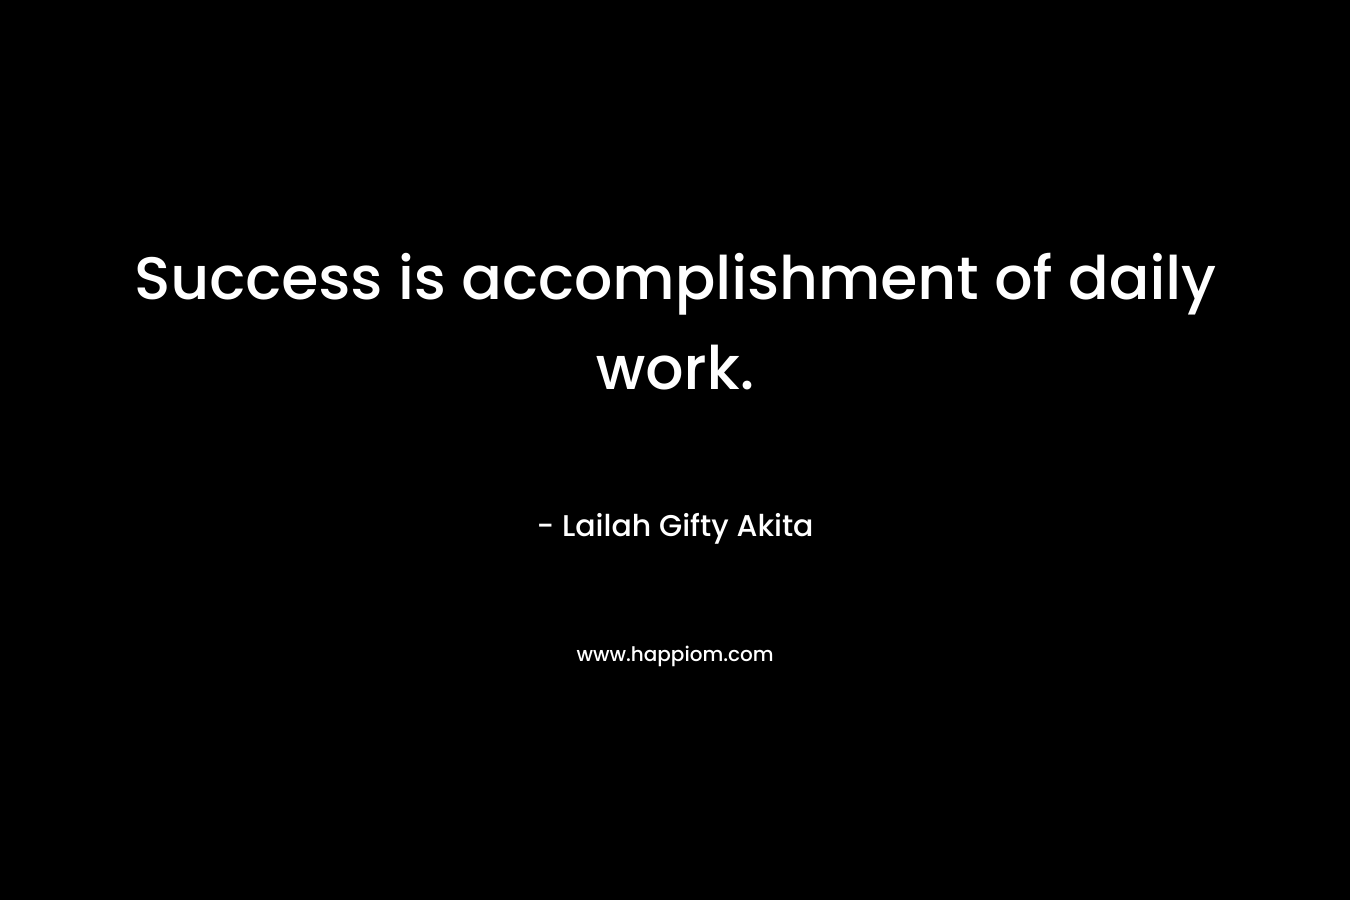 Success is accomplishment of daily work.